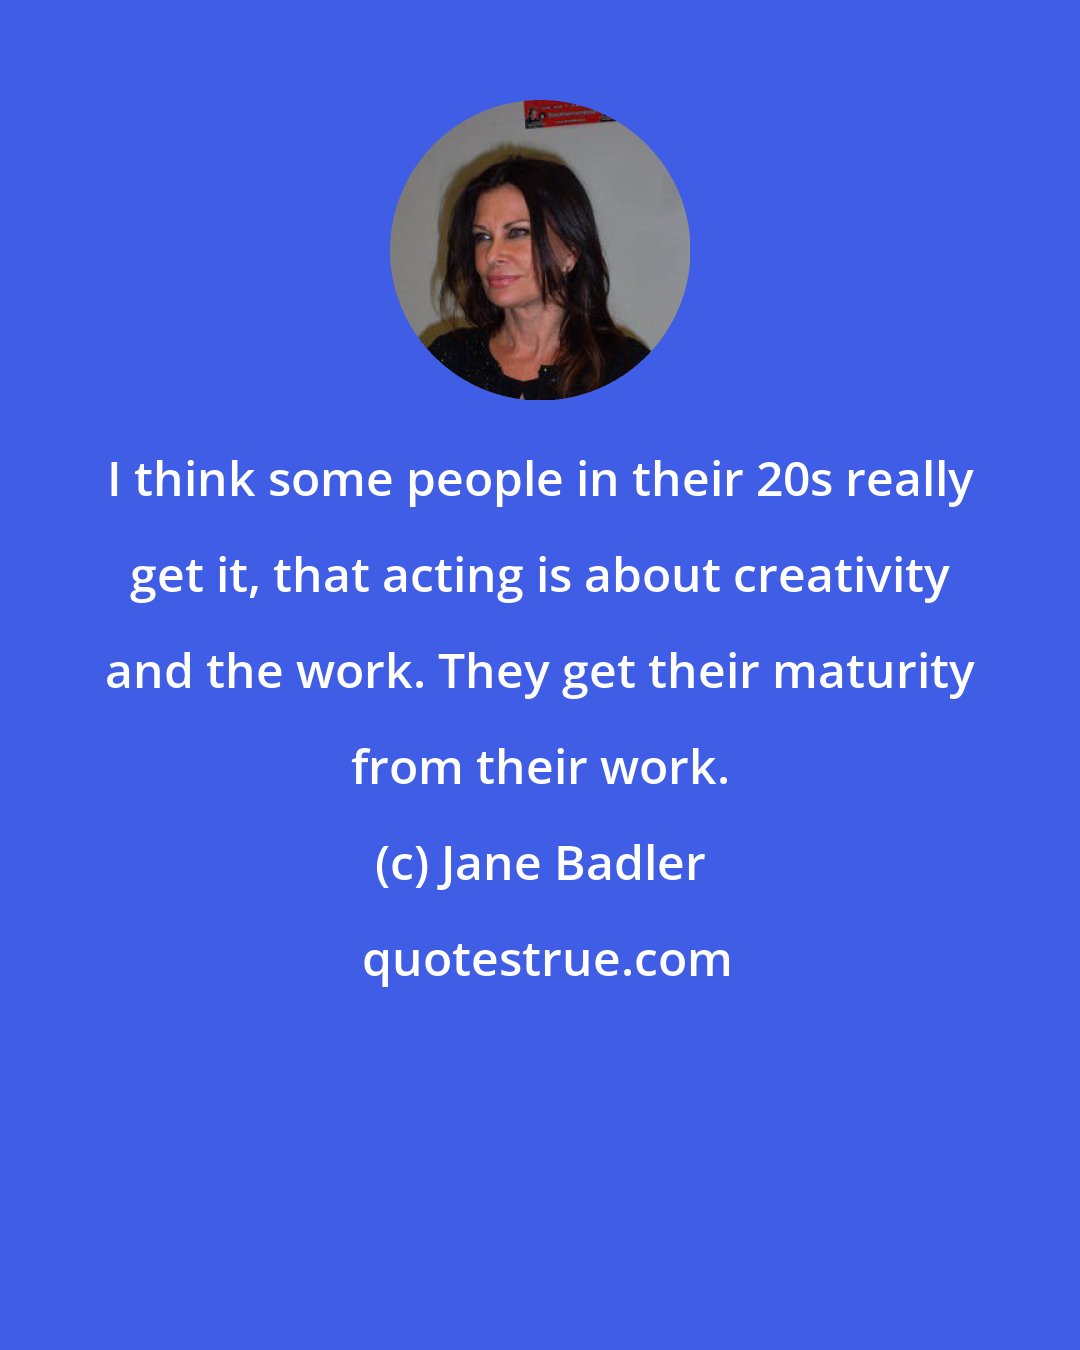 Jane Badler: I think some people in their 20s really get it, that acting is about creativity and the work. They get their maturity from their work.